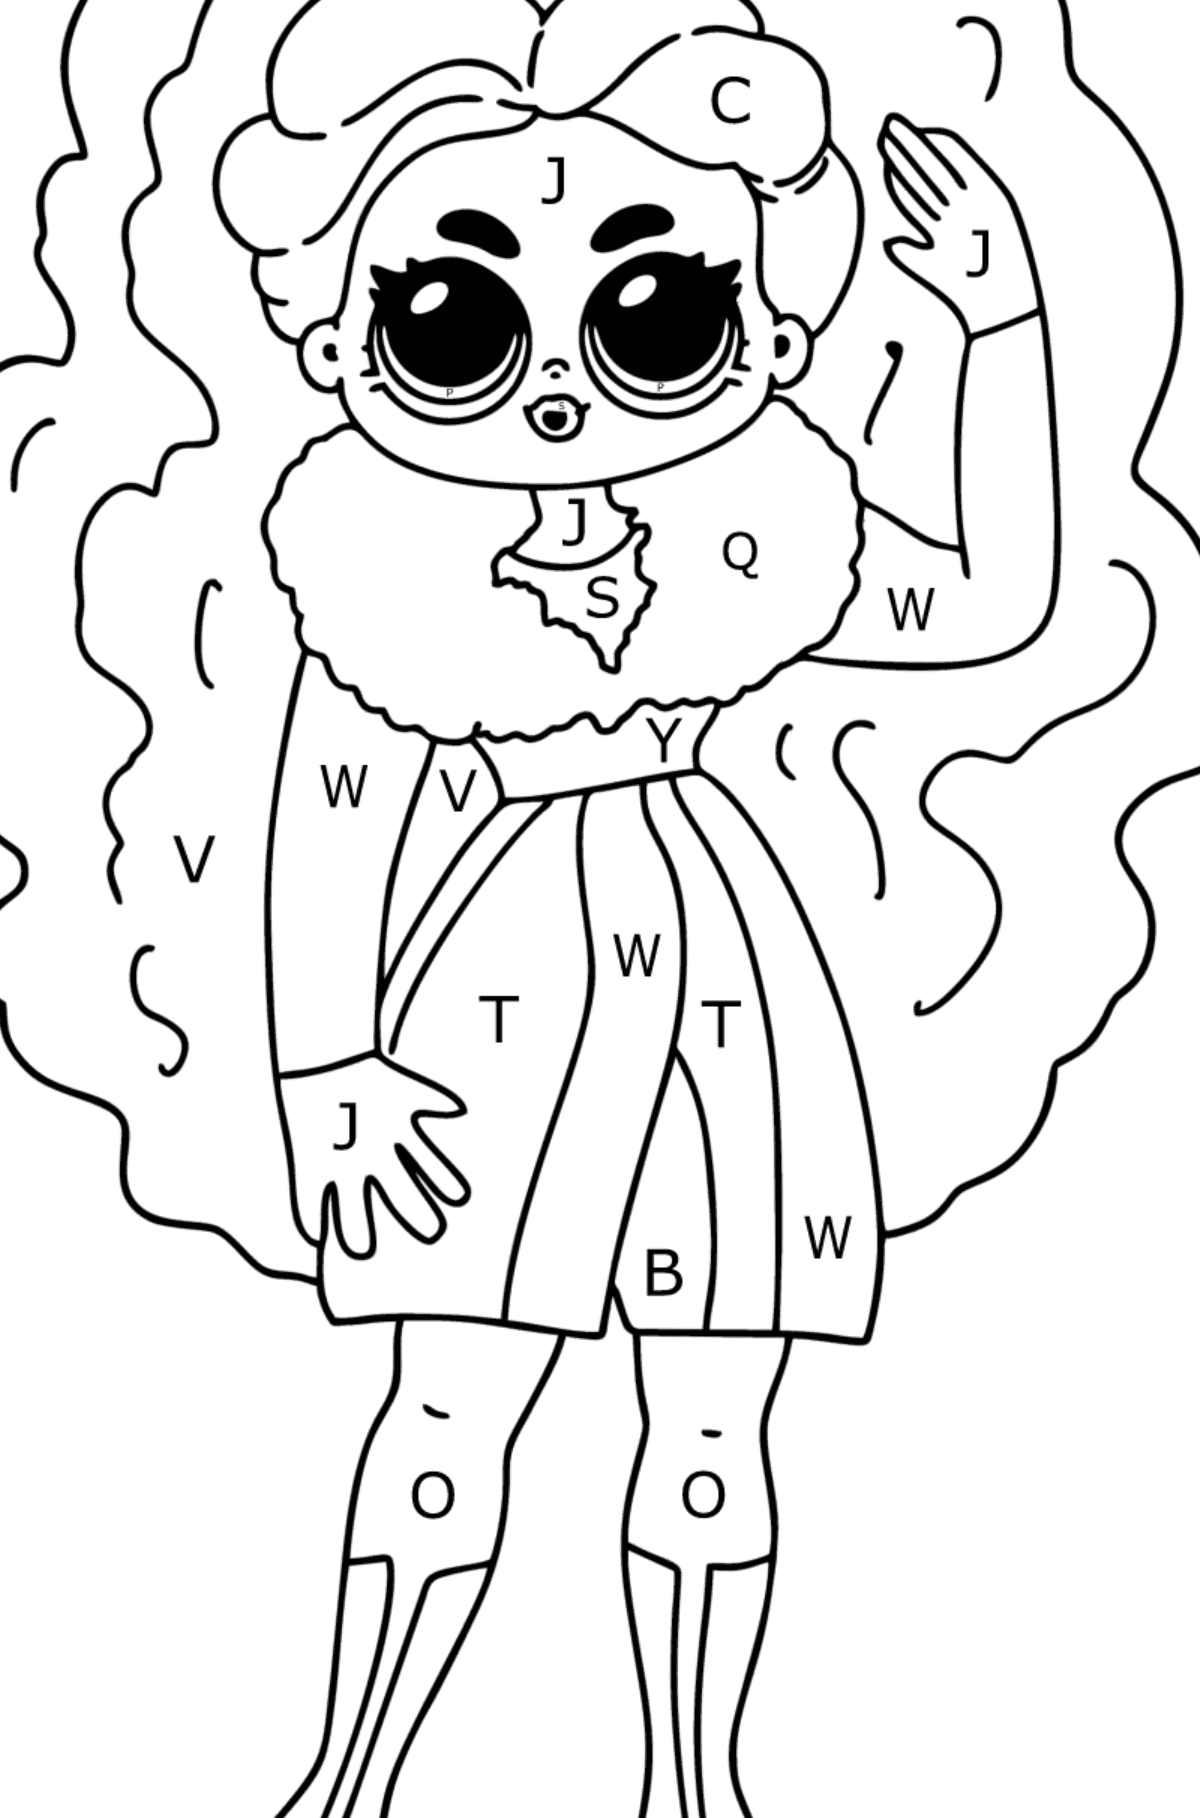 Coloring page LOL OMG Cute Girl - Coloring by Letters for Kids